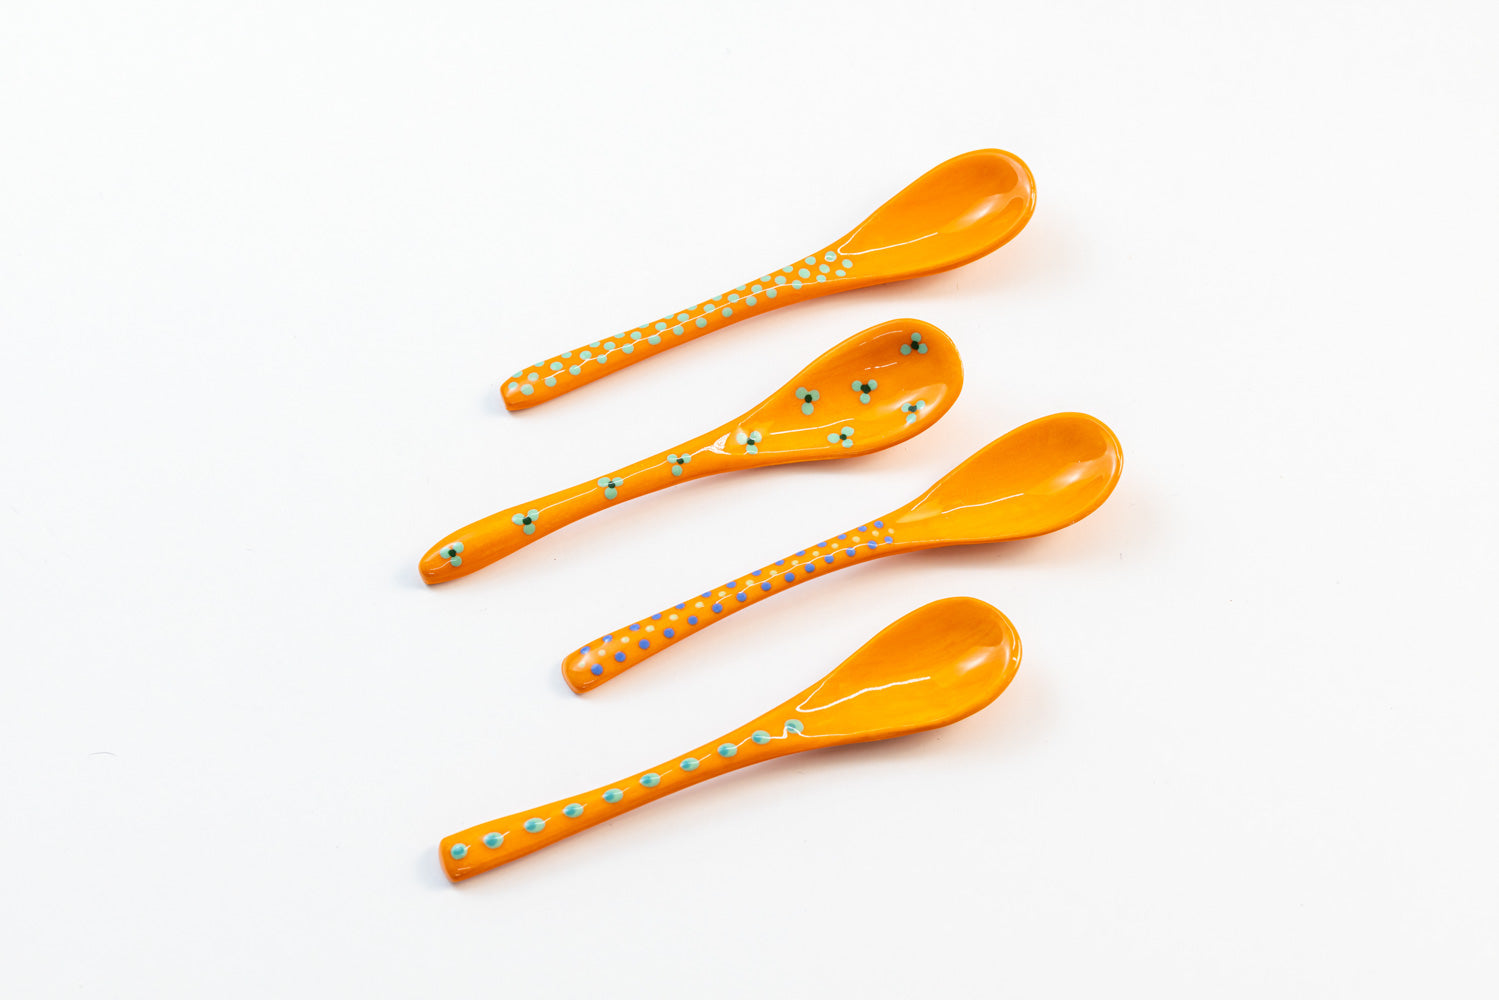 Small ceramic spoons with base color of Orange. Tiny dots & flowers painted on top in yellow, green, & light blue. So cute!